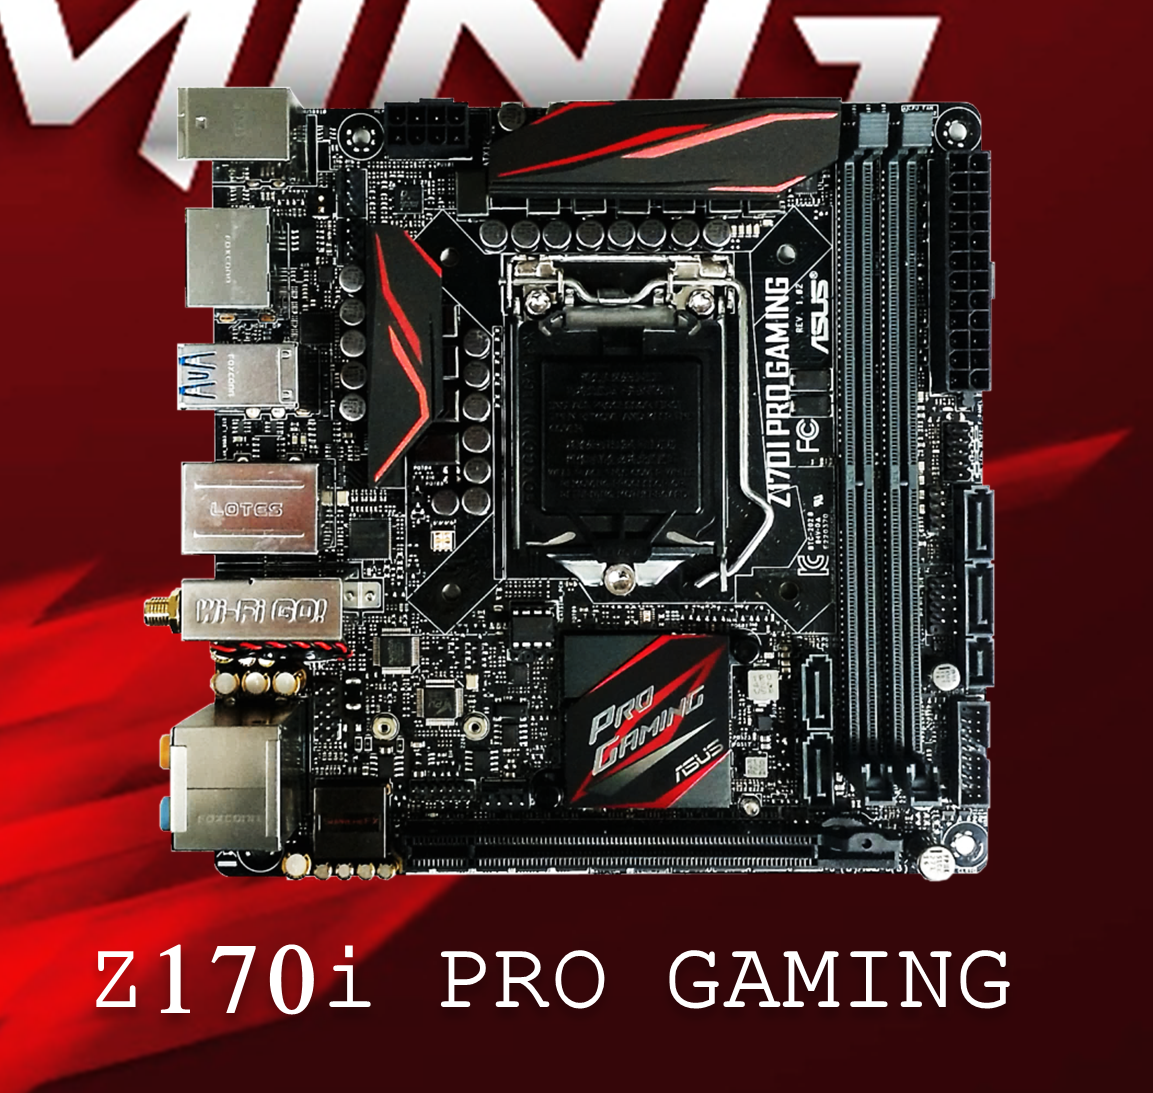 ASUS Z170: A, Deluxe, and Pro Gaming - Intel Skylake Z170 Motherboards: A Quick Look at Products